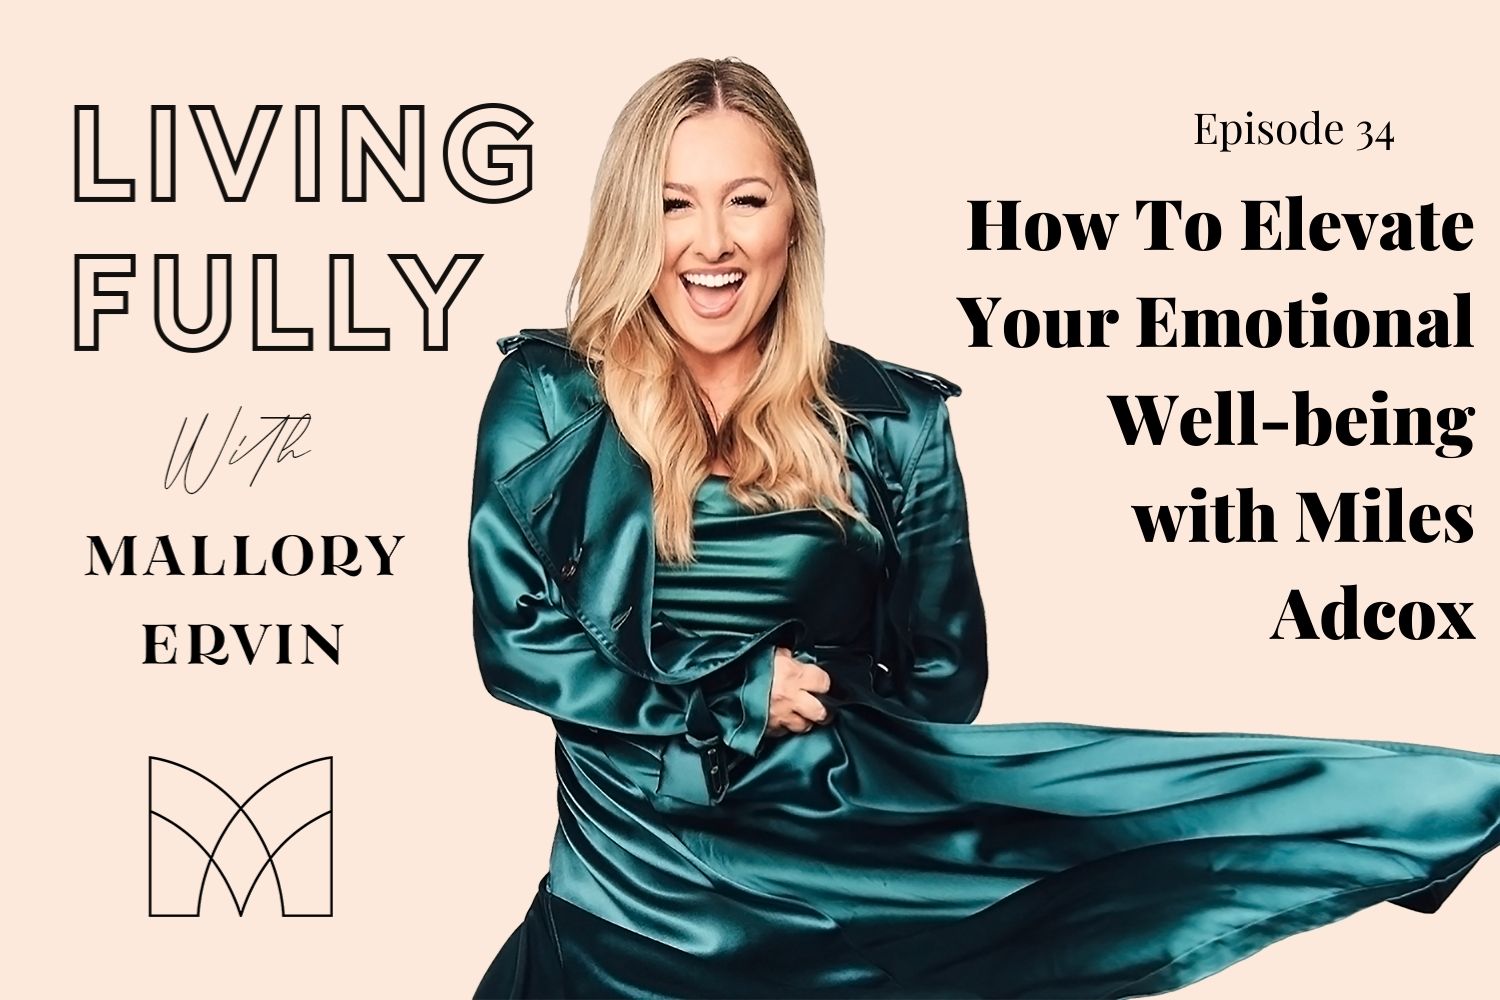 How To Elevate Your Emotional Well-being with Miles Adcox